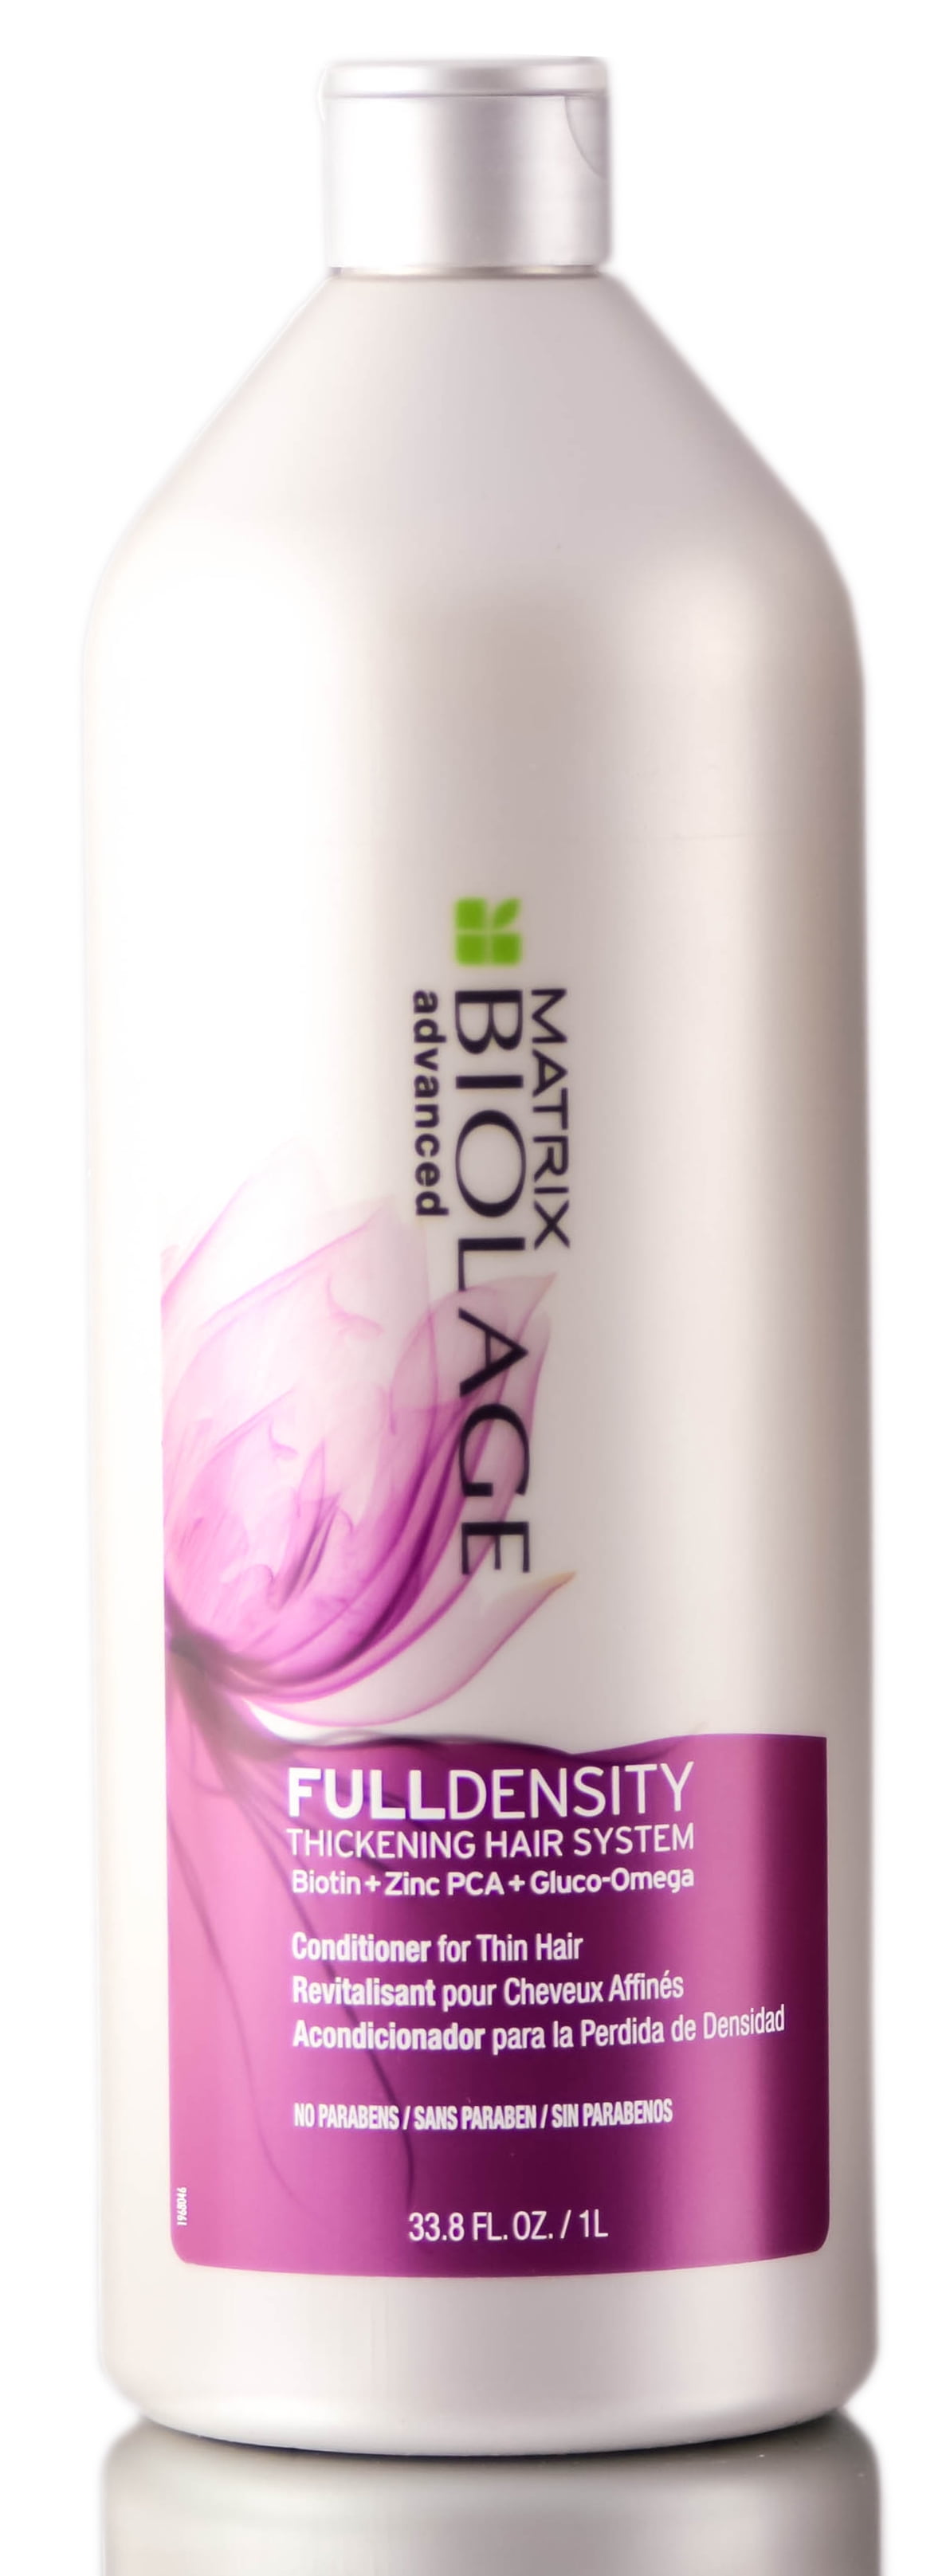 Biolage Full Density Shampoo for thin or thinning hair